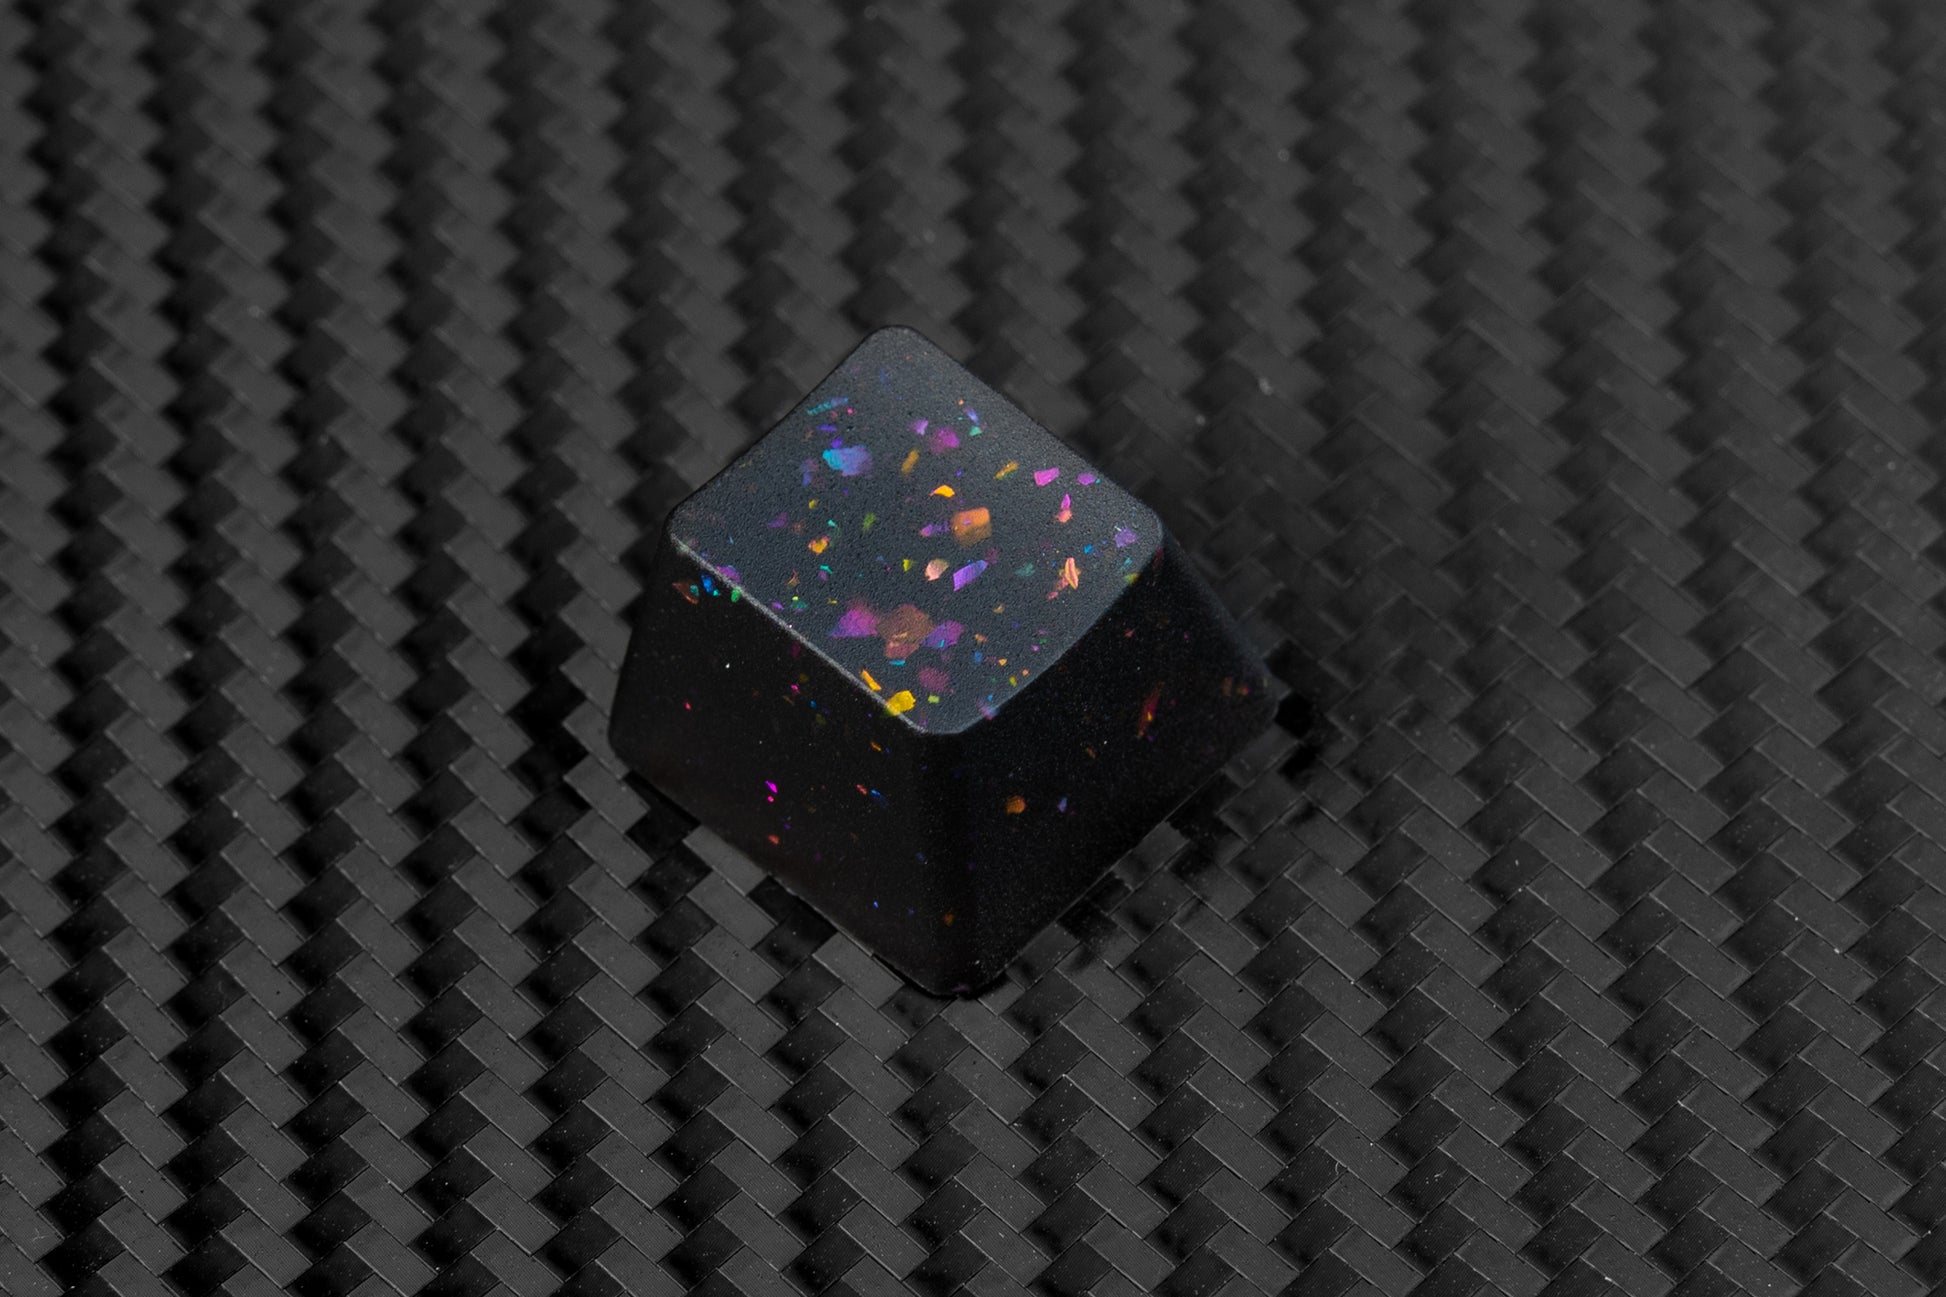 Mechanical keyboard key in party black. Party black metallic shards of color mixed into black buttons.  Keycap on carbon fiber background